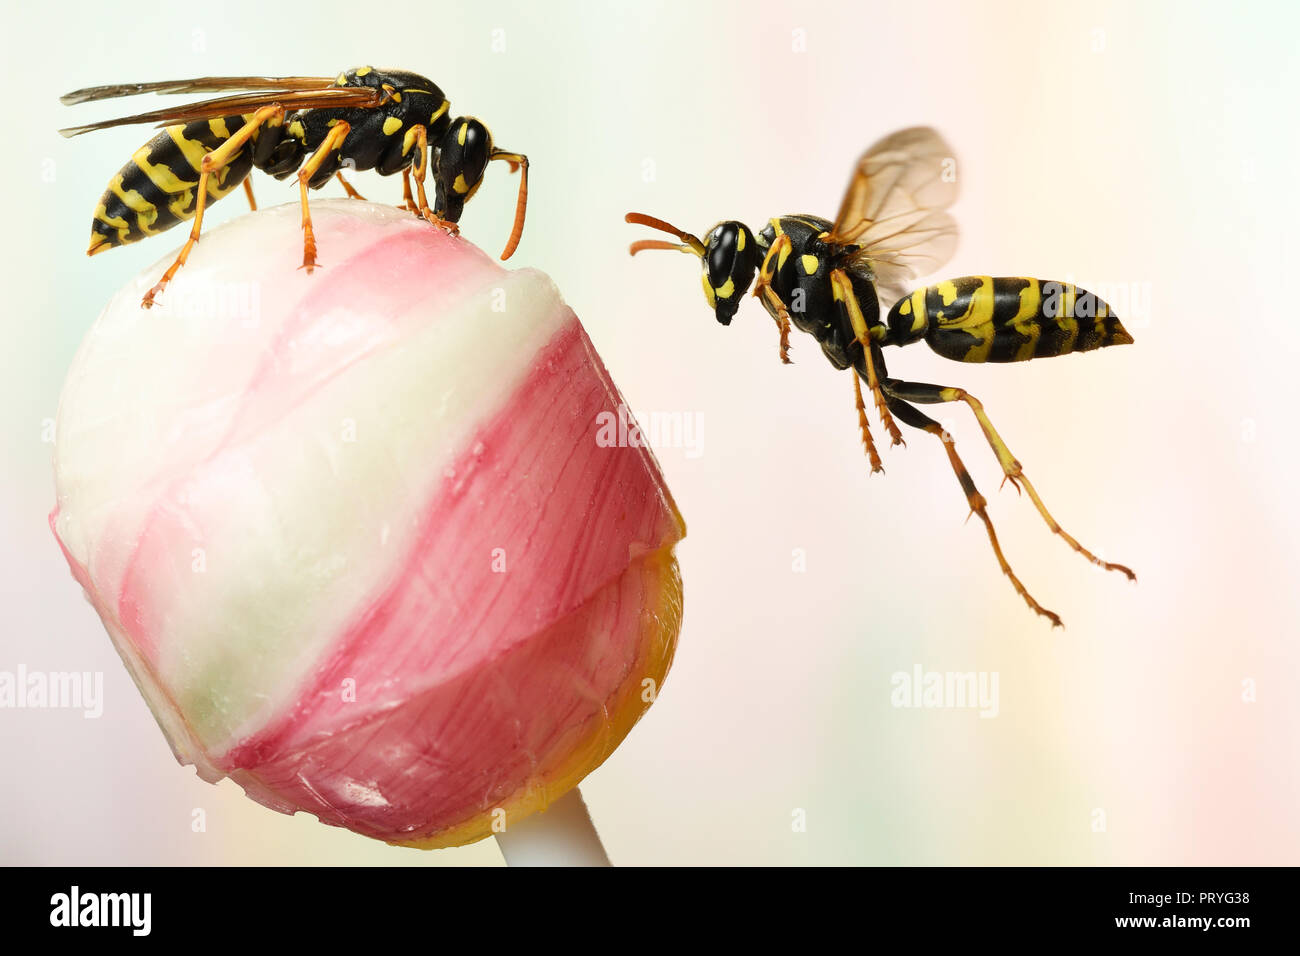 European Paper Wasps (Polistes dominula) on a lollipop, Germany Stock Photo